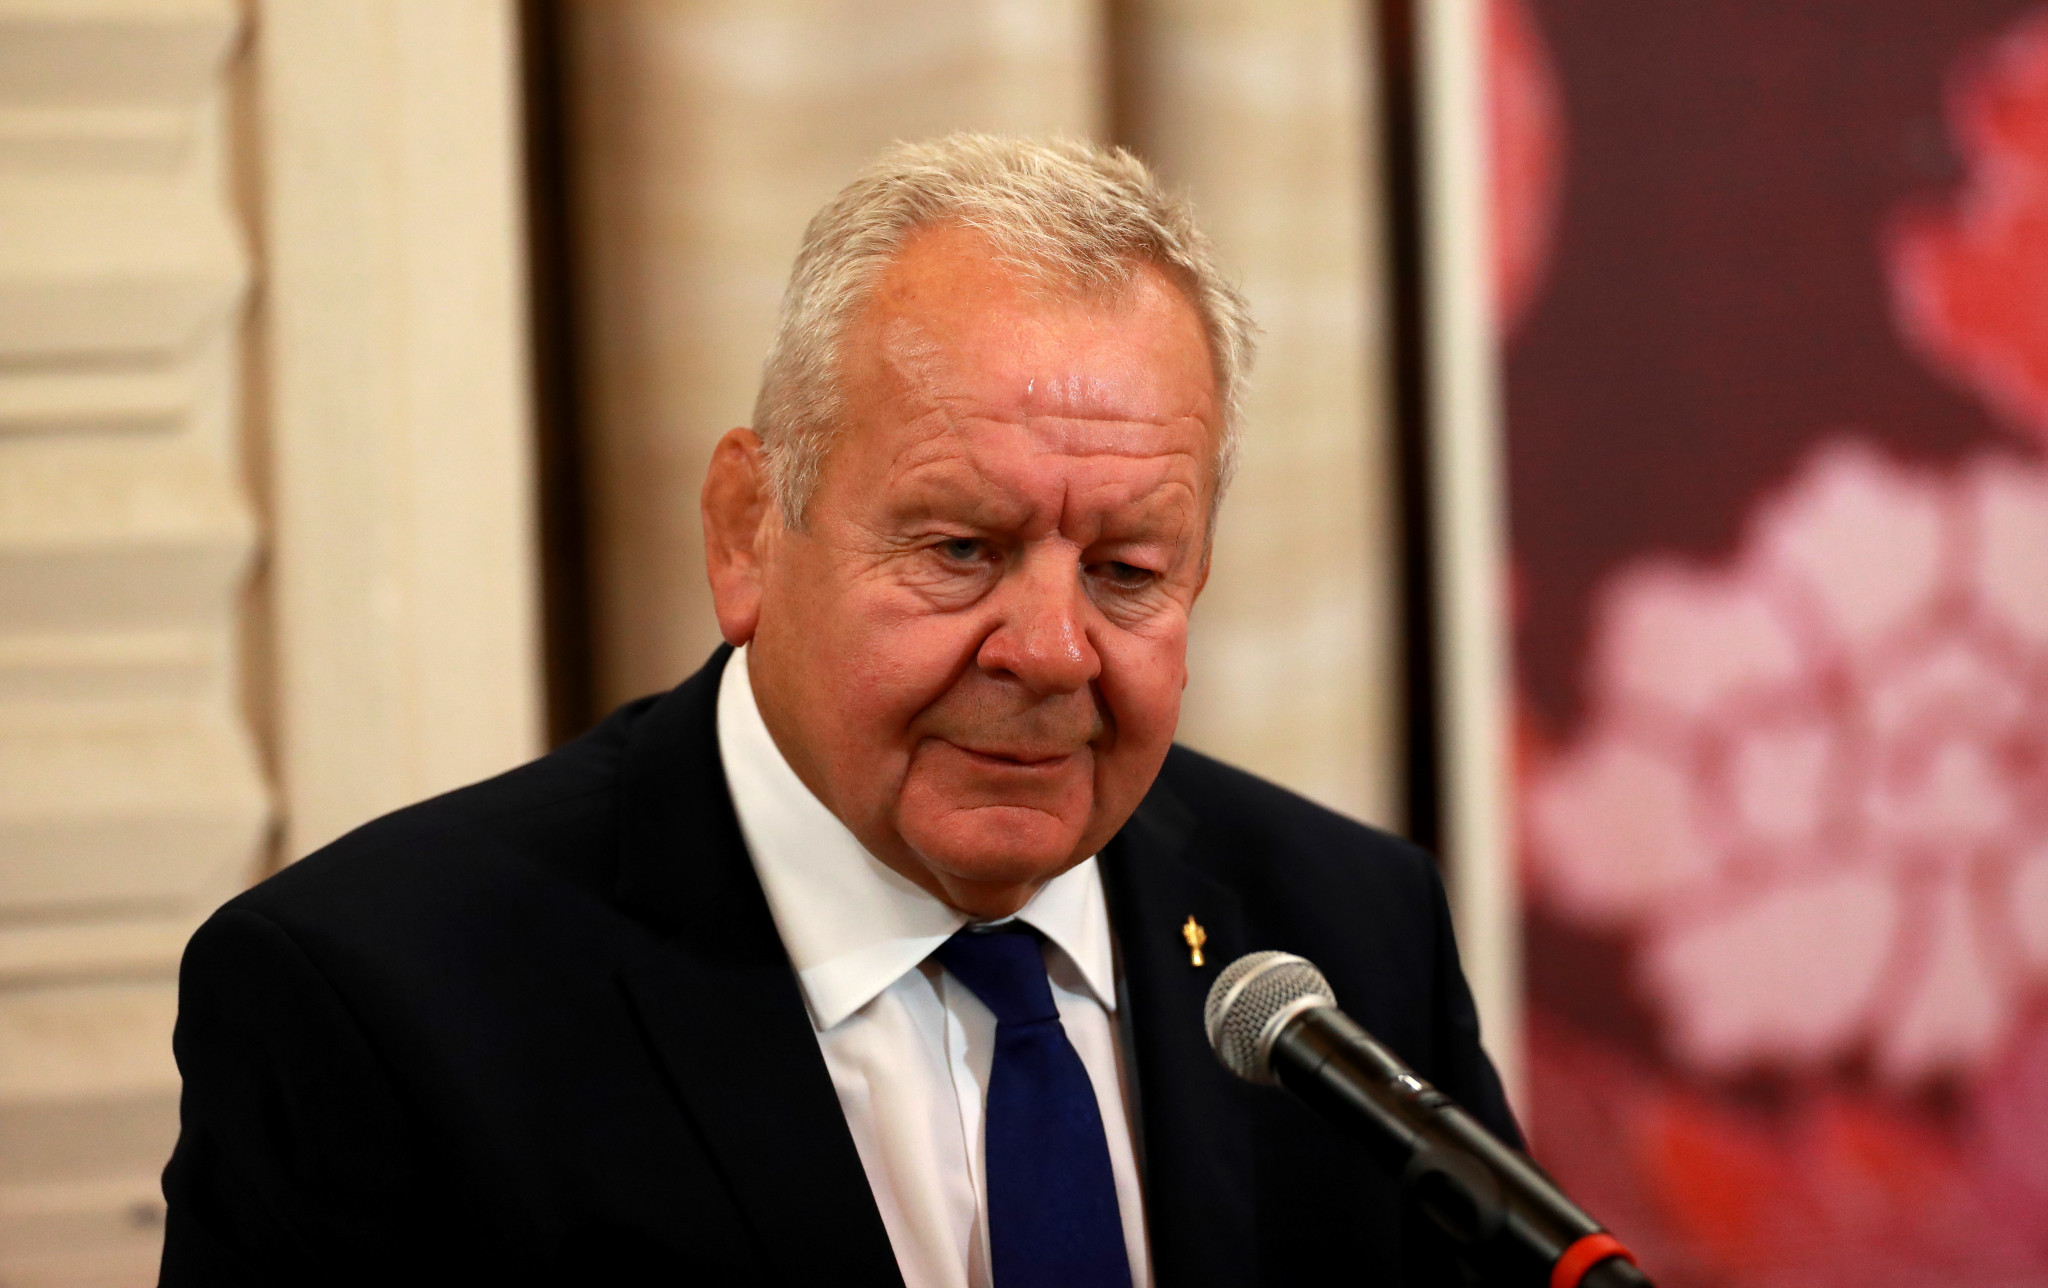 The Welsh Rugby Union has announced it has backed Sir Bill Beaumont in the World Rugby leadership election ©Getty Images